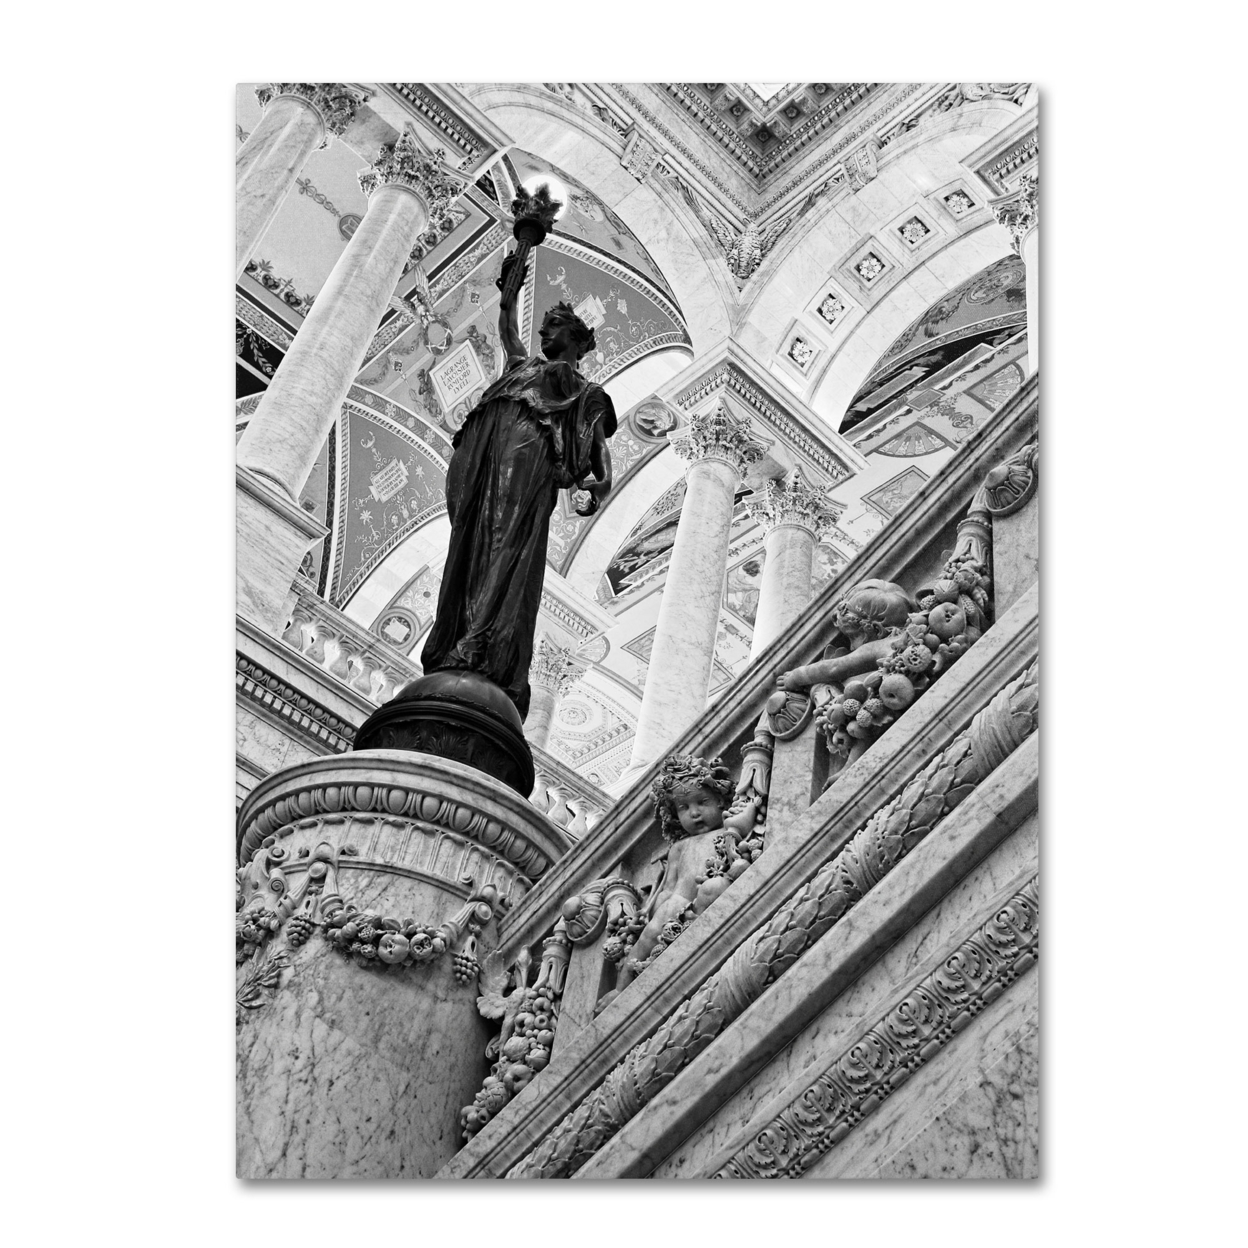 Gregory Ohanlon 'Library Of Congress- Great Hall' Canvas Art 18 X 24